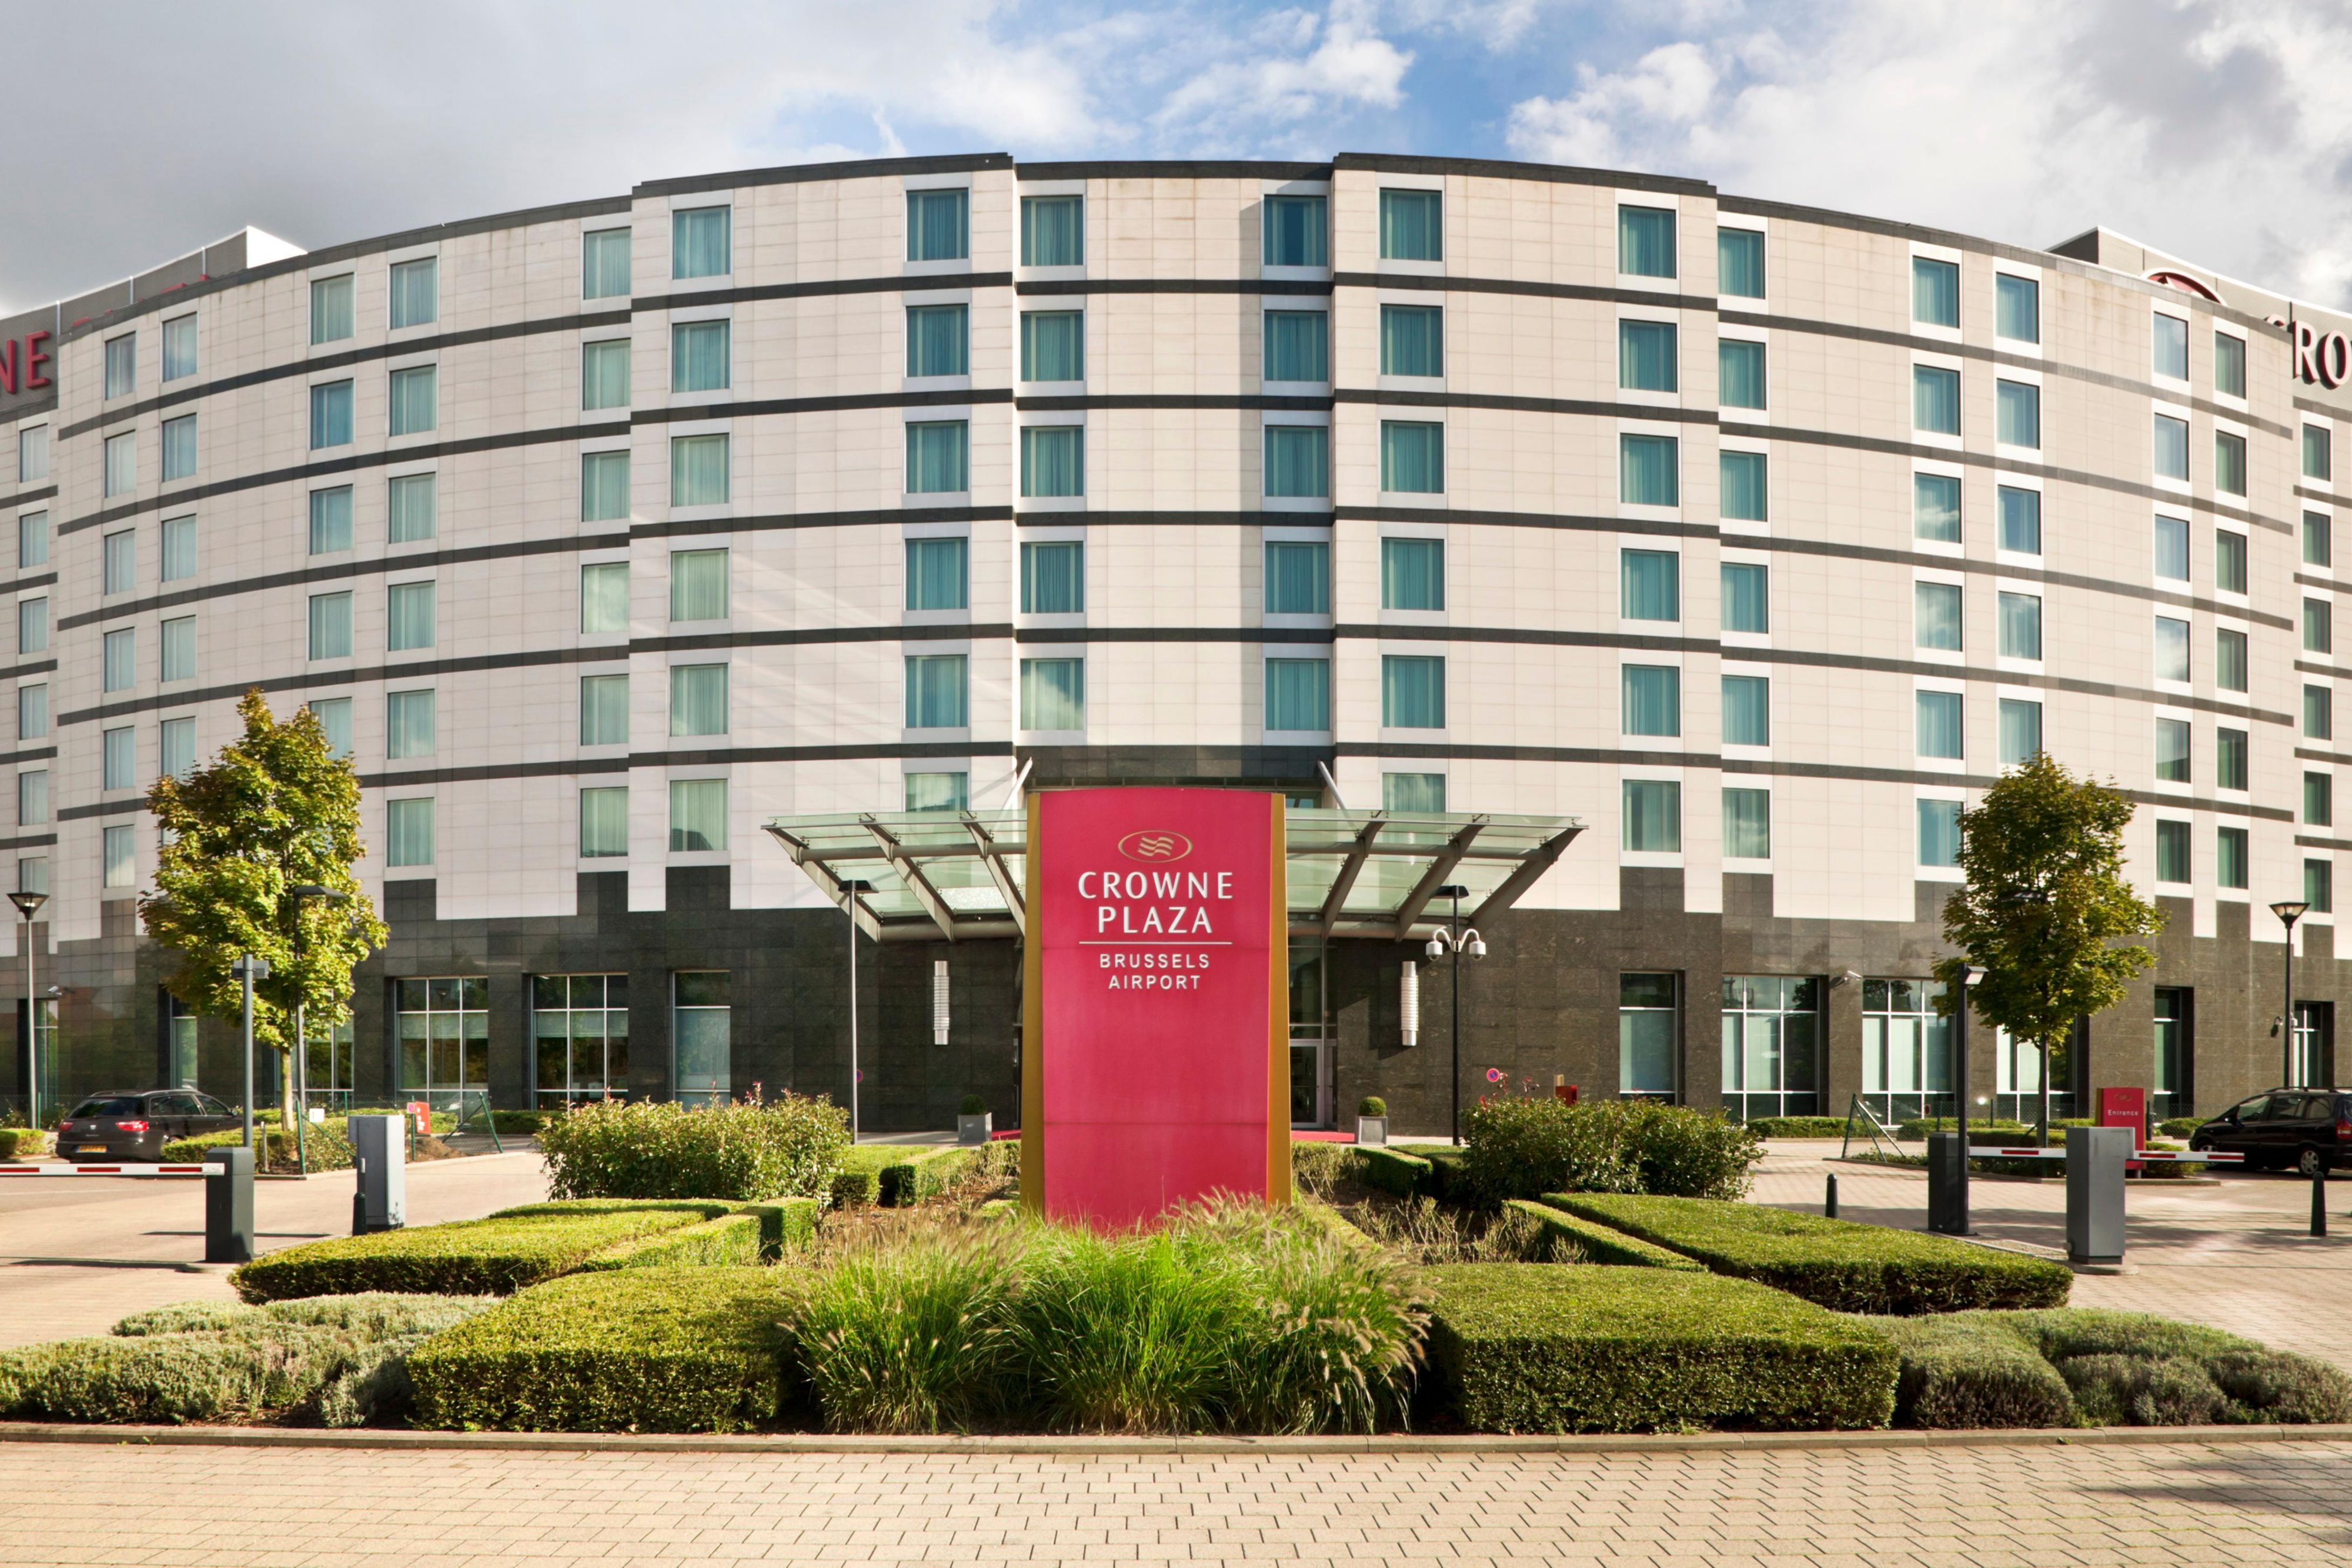 Welcome to the Crowne Plaza Brussels Airport